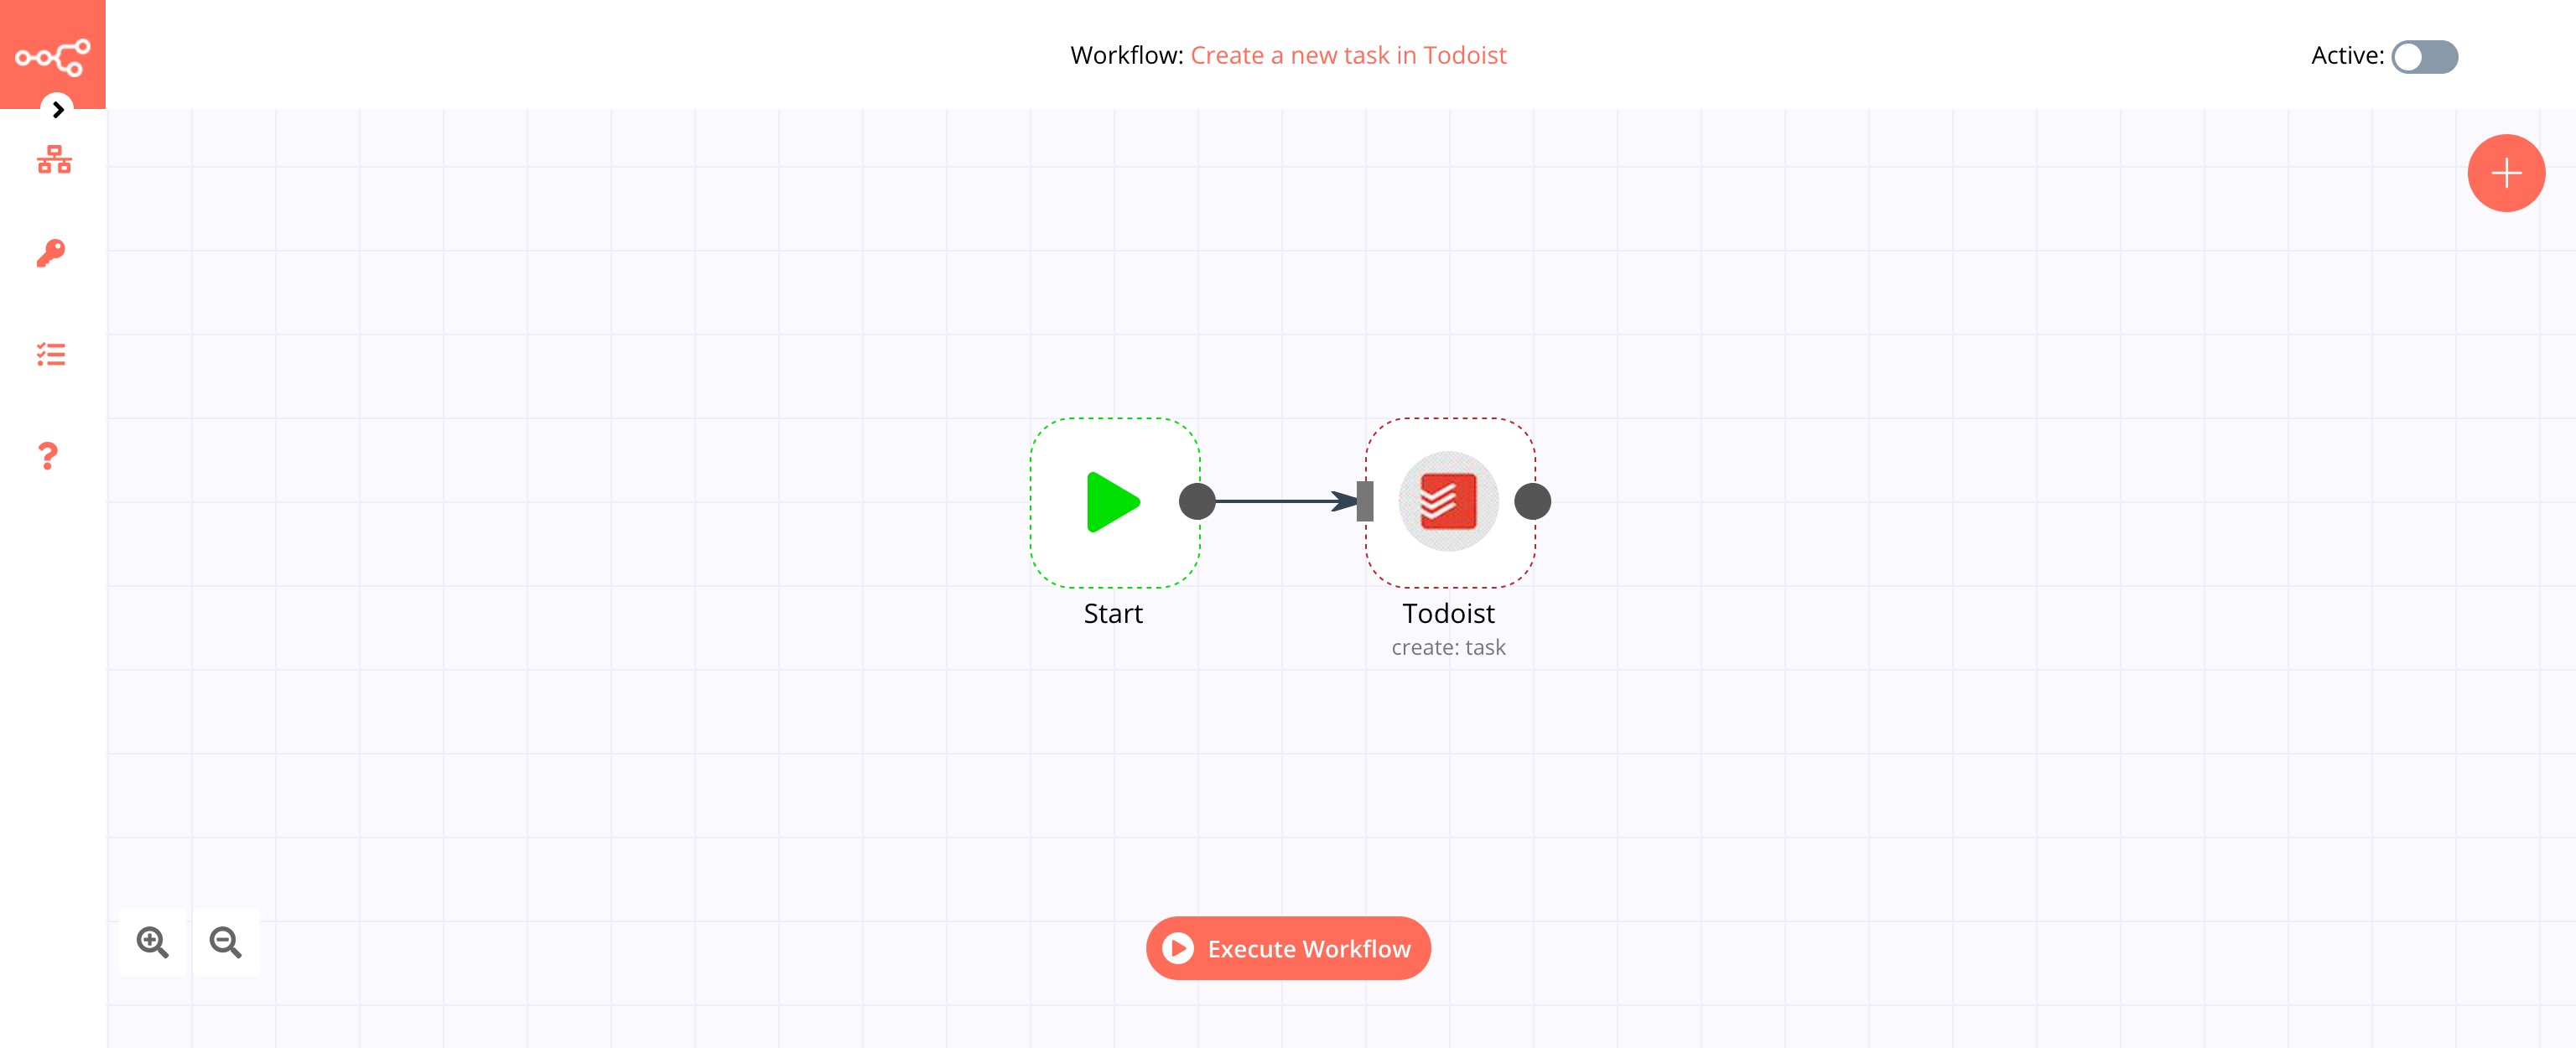 A workflow with the Todoist node